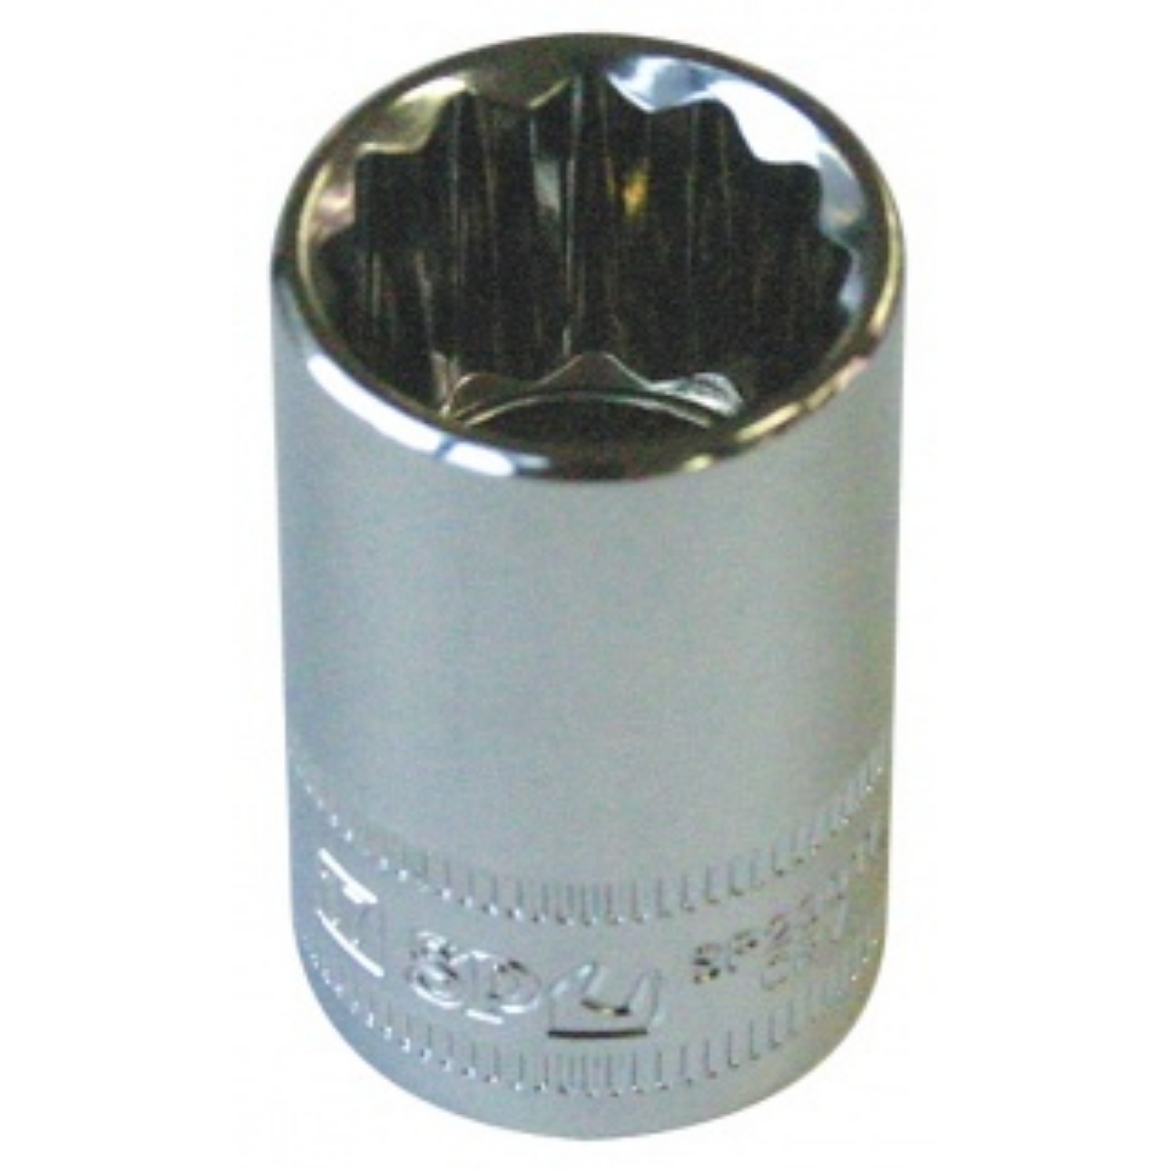 Picture of SOCKET 1/2DR 12PT METRIC 20MM SP TOOLS